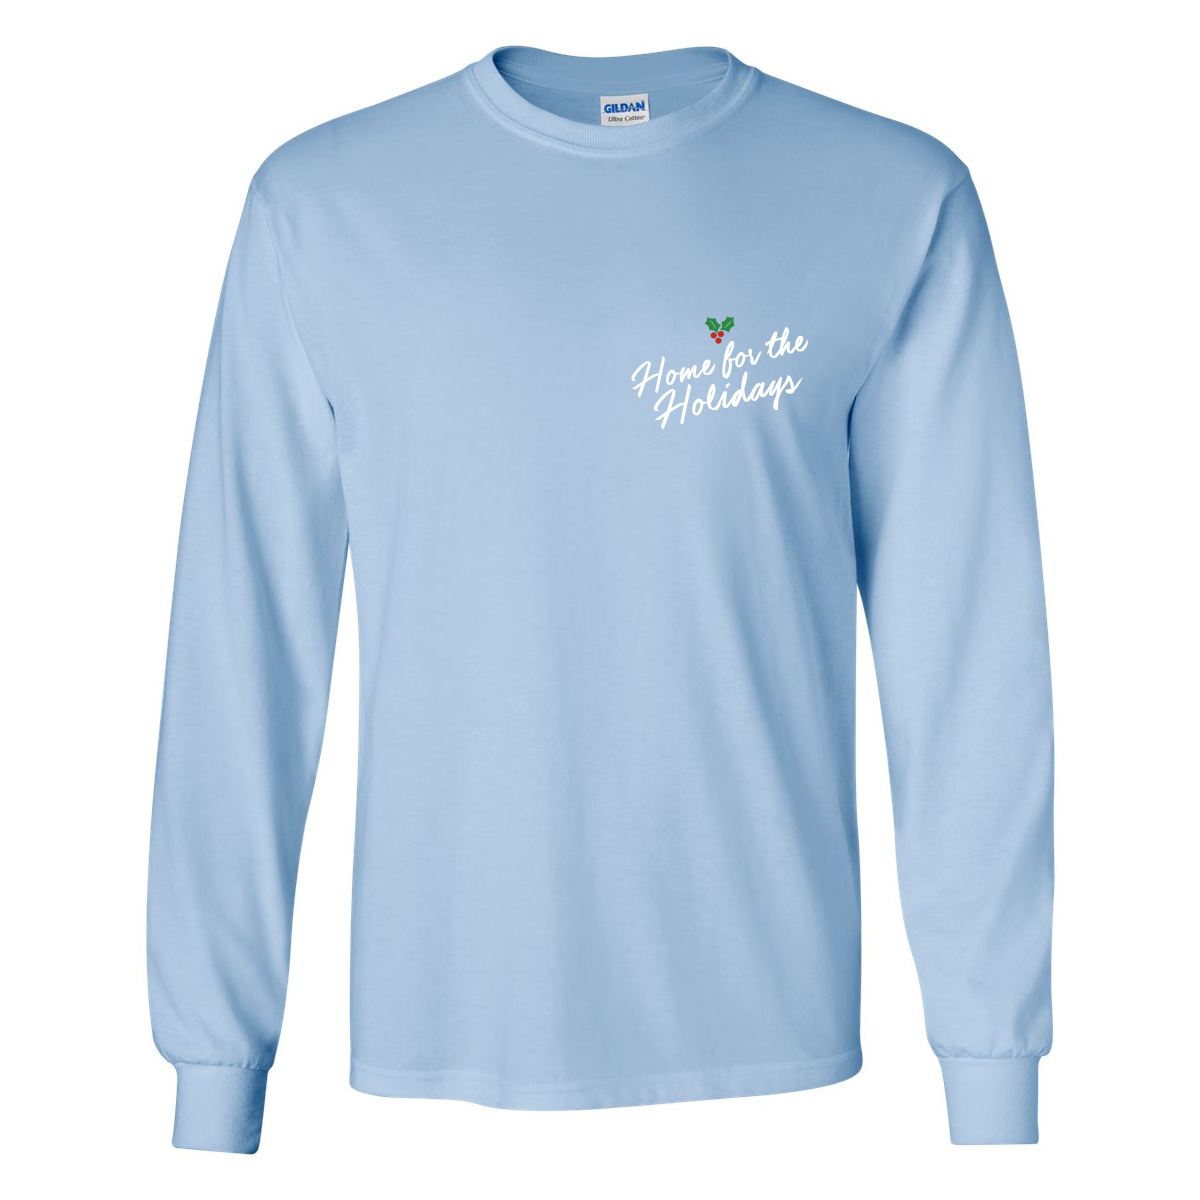 *PRE-ORDER* Home for the Holidays Christmas Tree Truck (Light Blue) / Long Sleeve Shirt (Estimated Ship Date: 12/15) - Route One Apparel